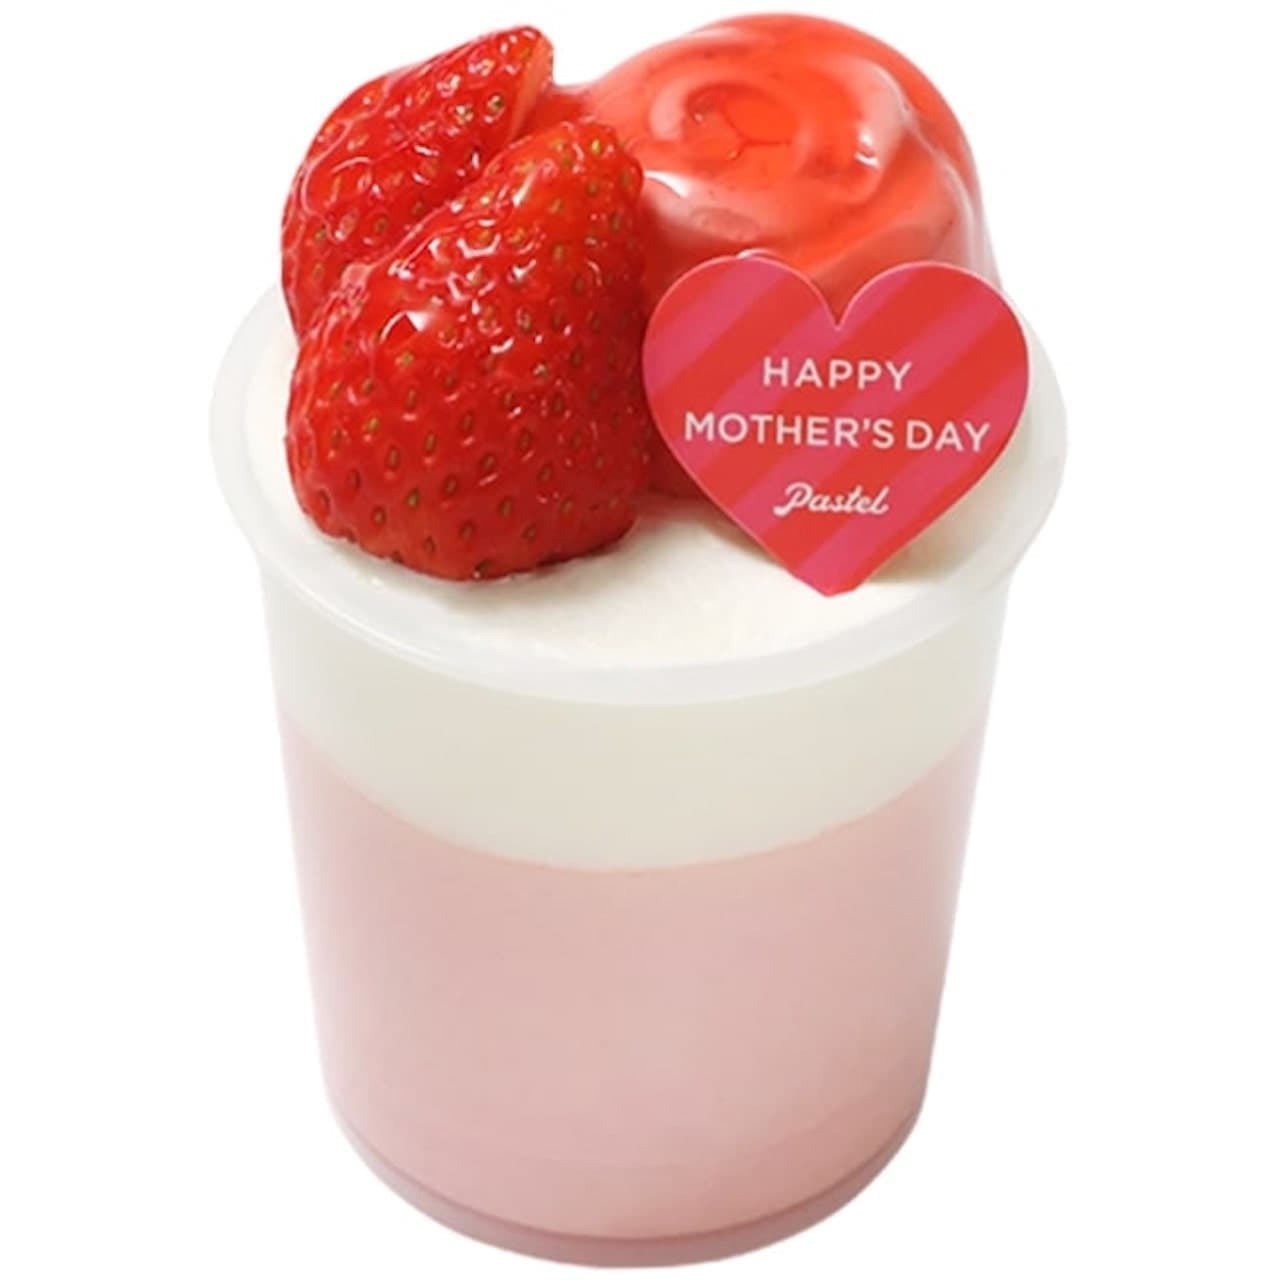 Pastel "Mother's Day Pudding"